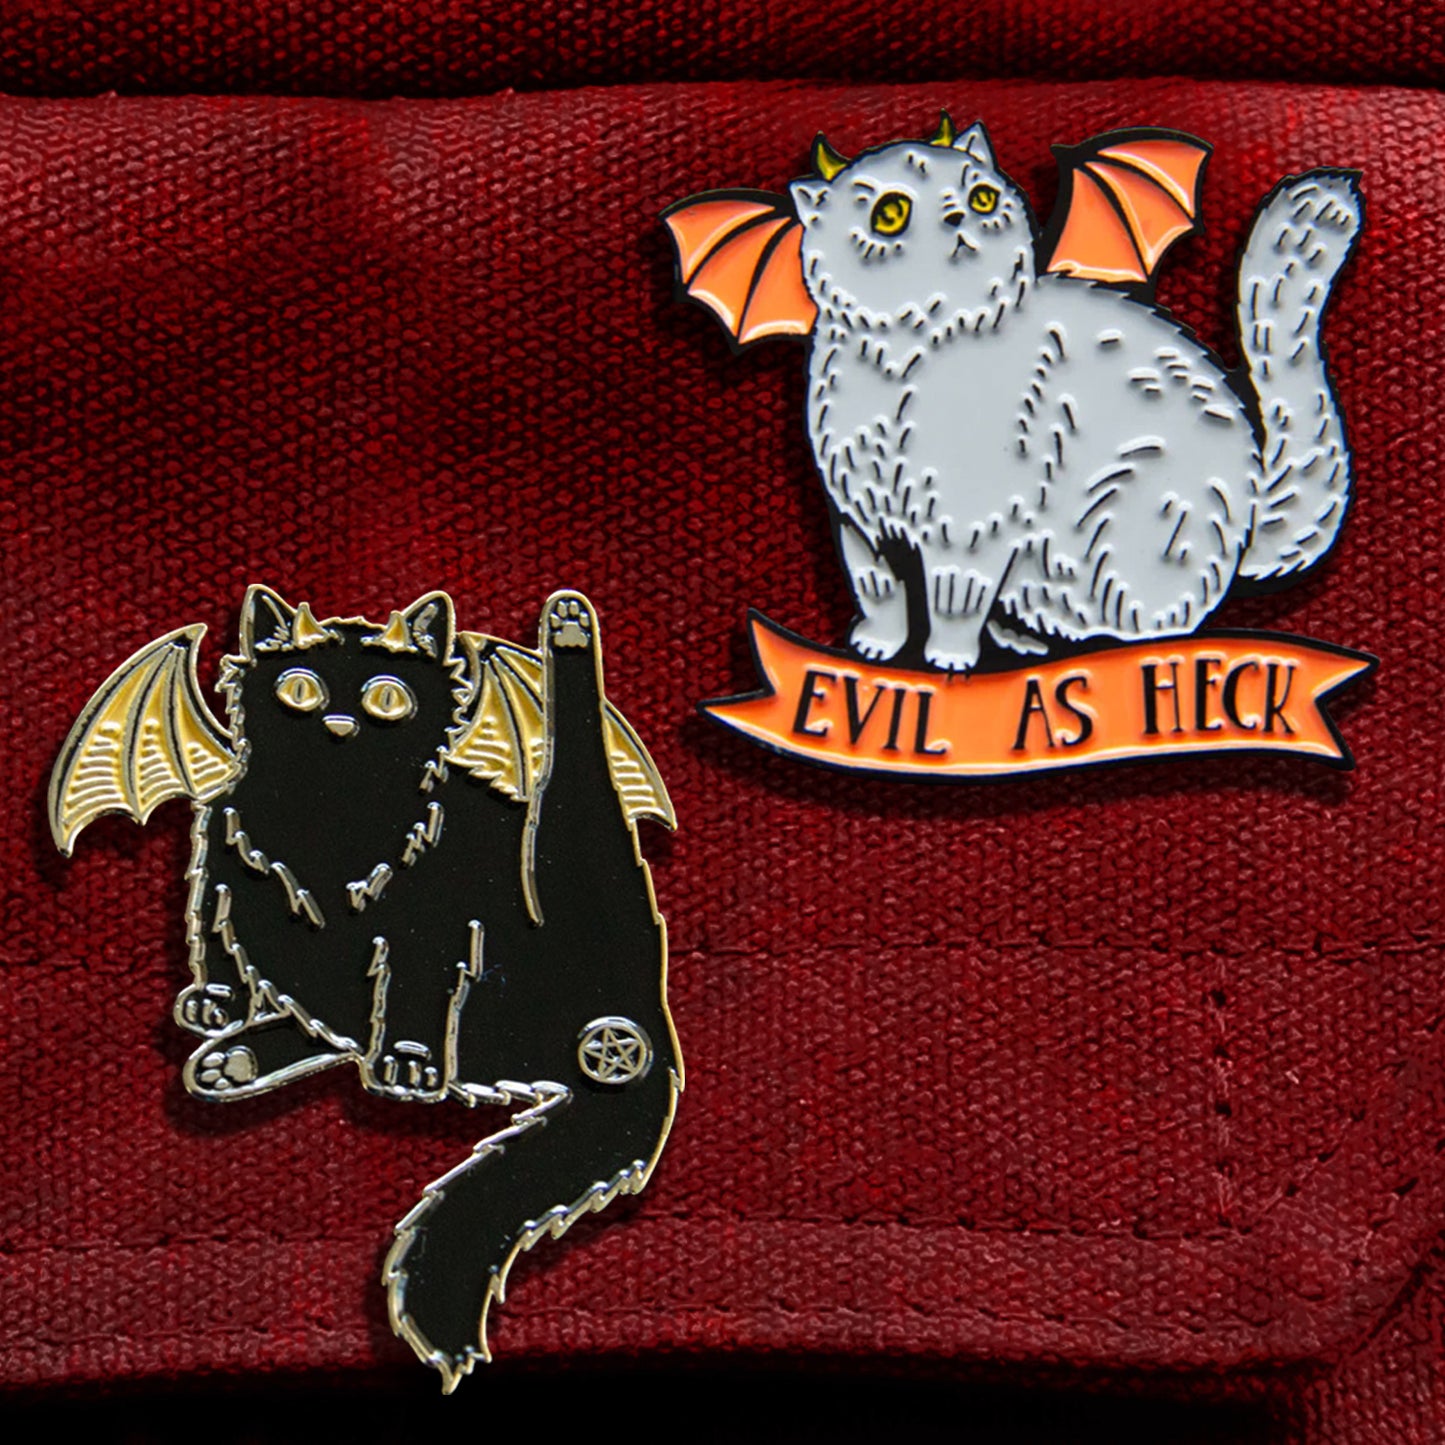 Two enamel pins attached to a red canvas bag. One pin is in the shape of a black cat, with yellow bat-like wings. One of the cat’s hind legs is lifted, and the cat’s butthole is covered by a pentagram. The other pin is in the shape of a grey cat with orange bat wings and yellow horns. Under the cat is an orange ribbon with black text saying "Evil as heck."